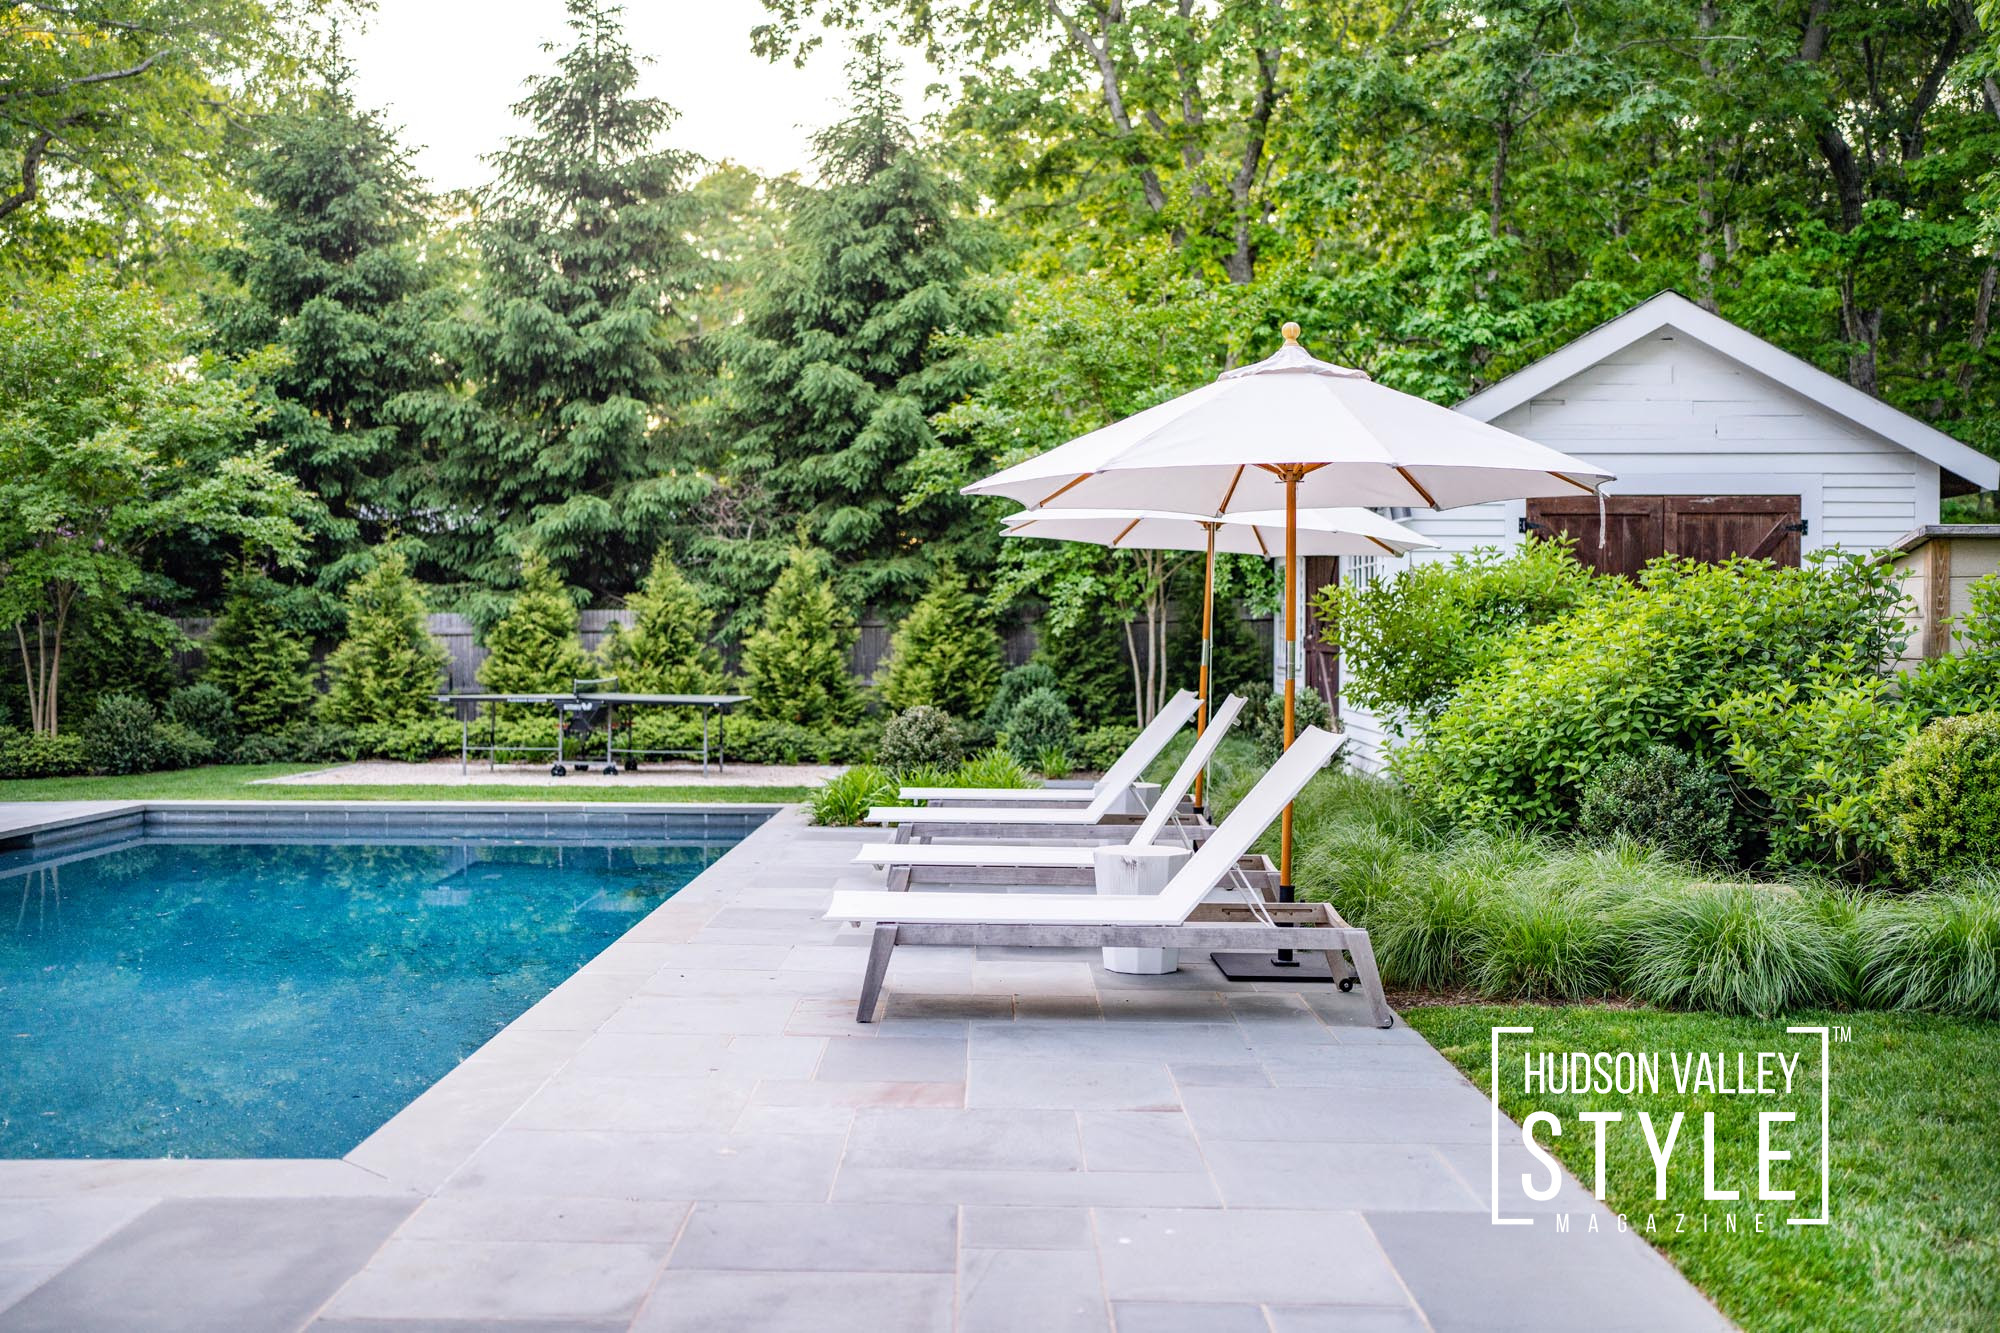 Celestial Seclusion in East Hampton - A Luxury Airbnb Retreat Captured by Renowned Travel Lifestyle Photographer Maxwell Alexander – Presented by Alluvion Media